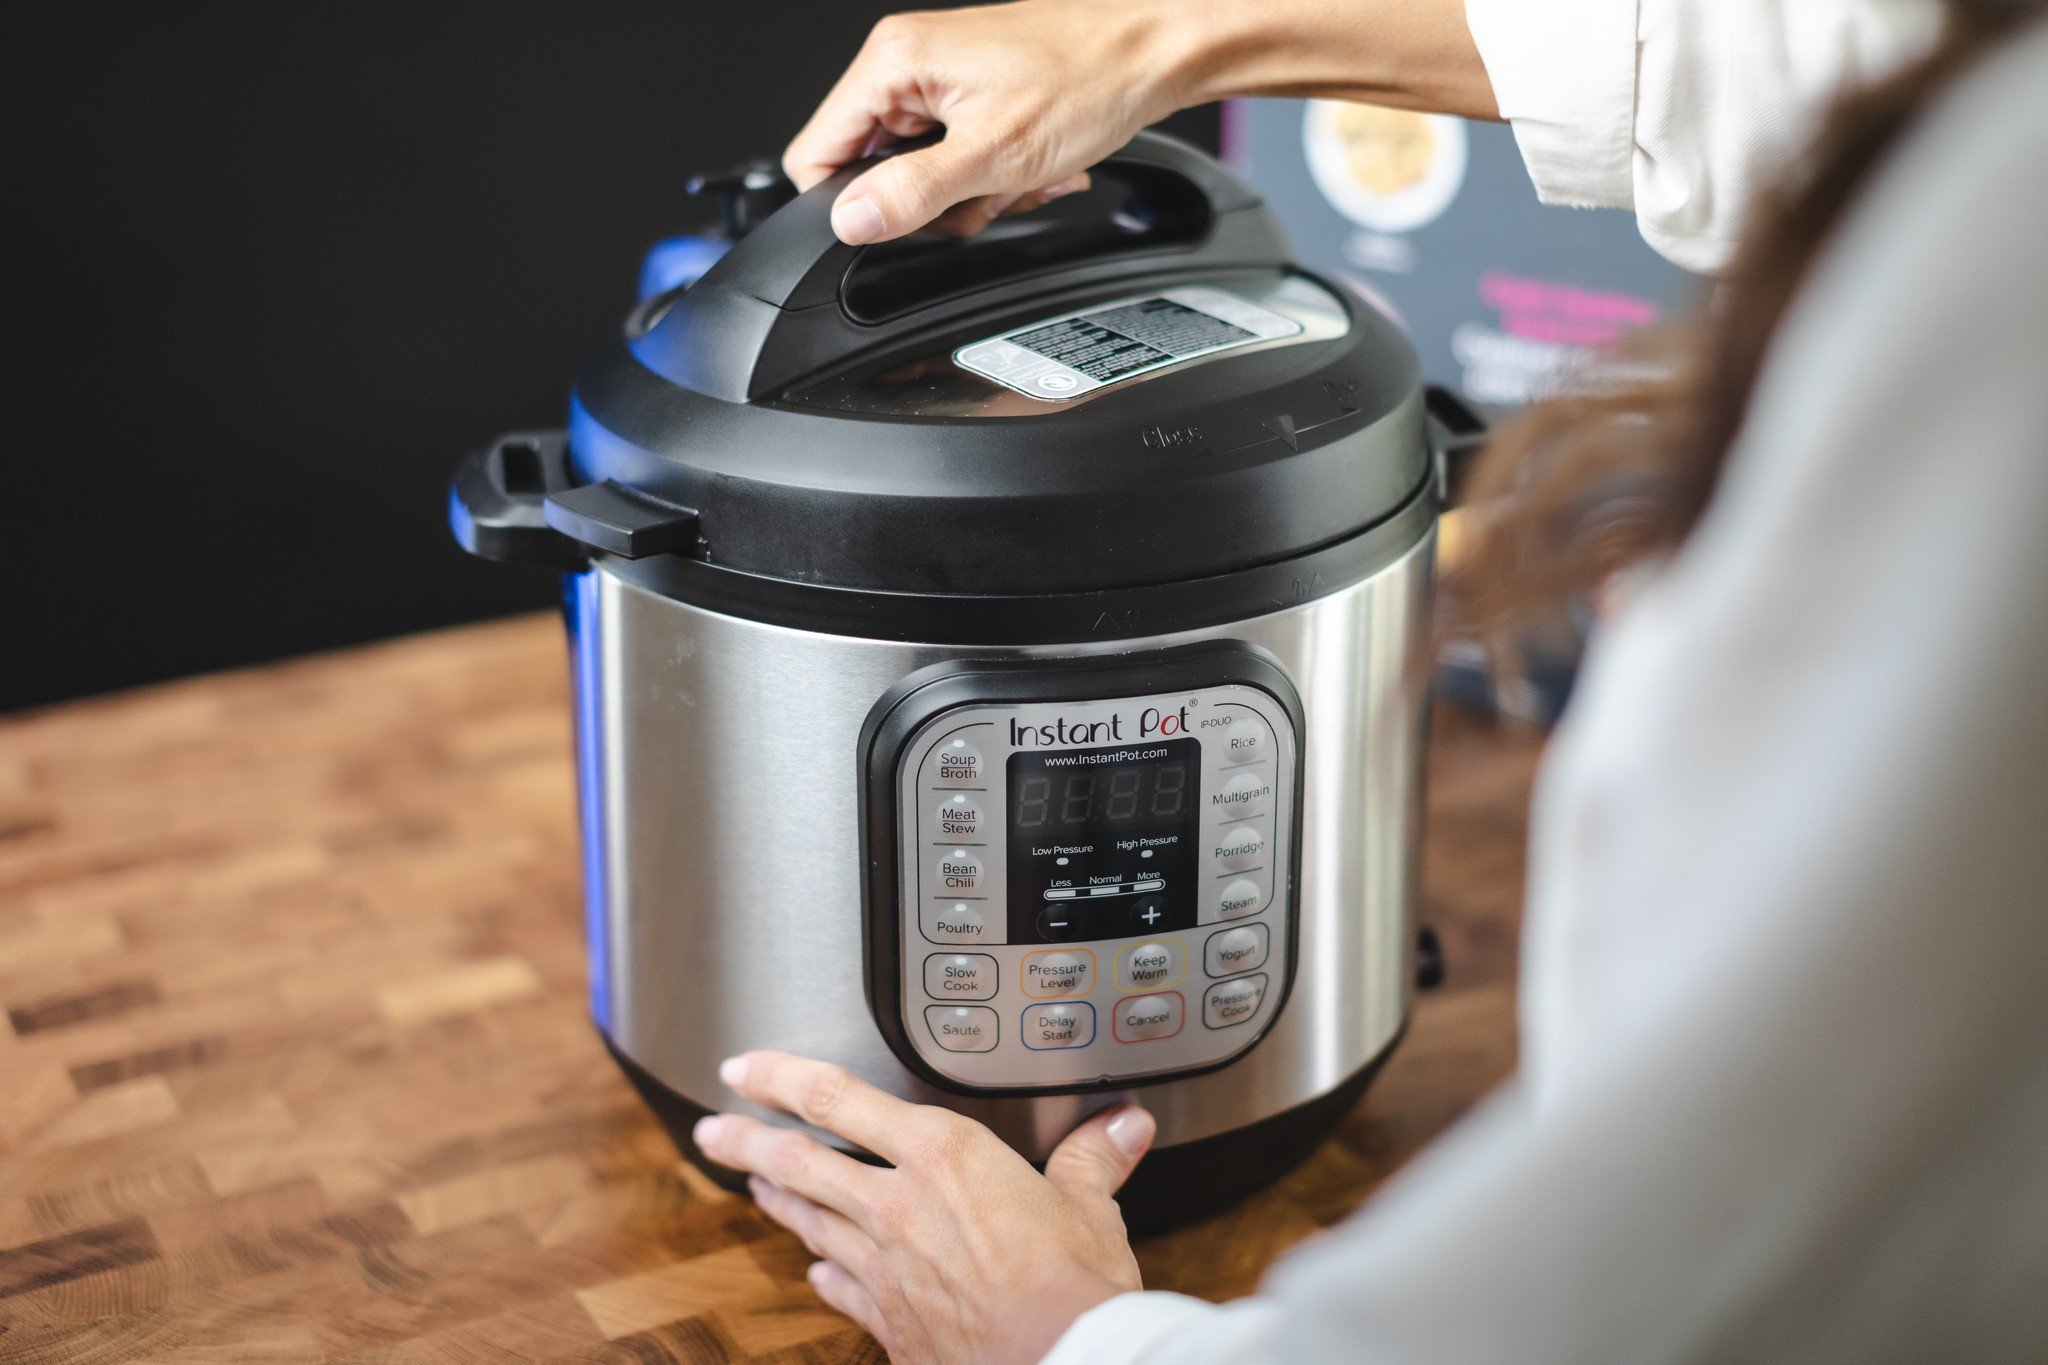 Opening lid on Instant Pot DUO60